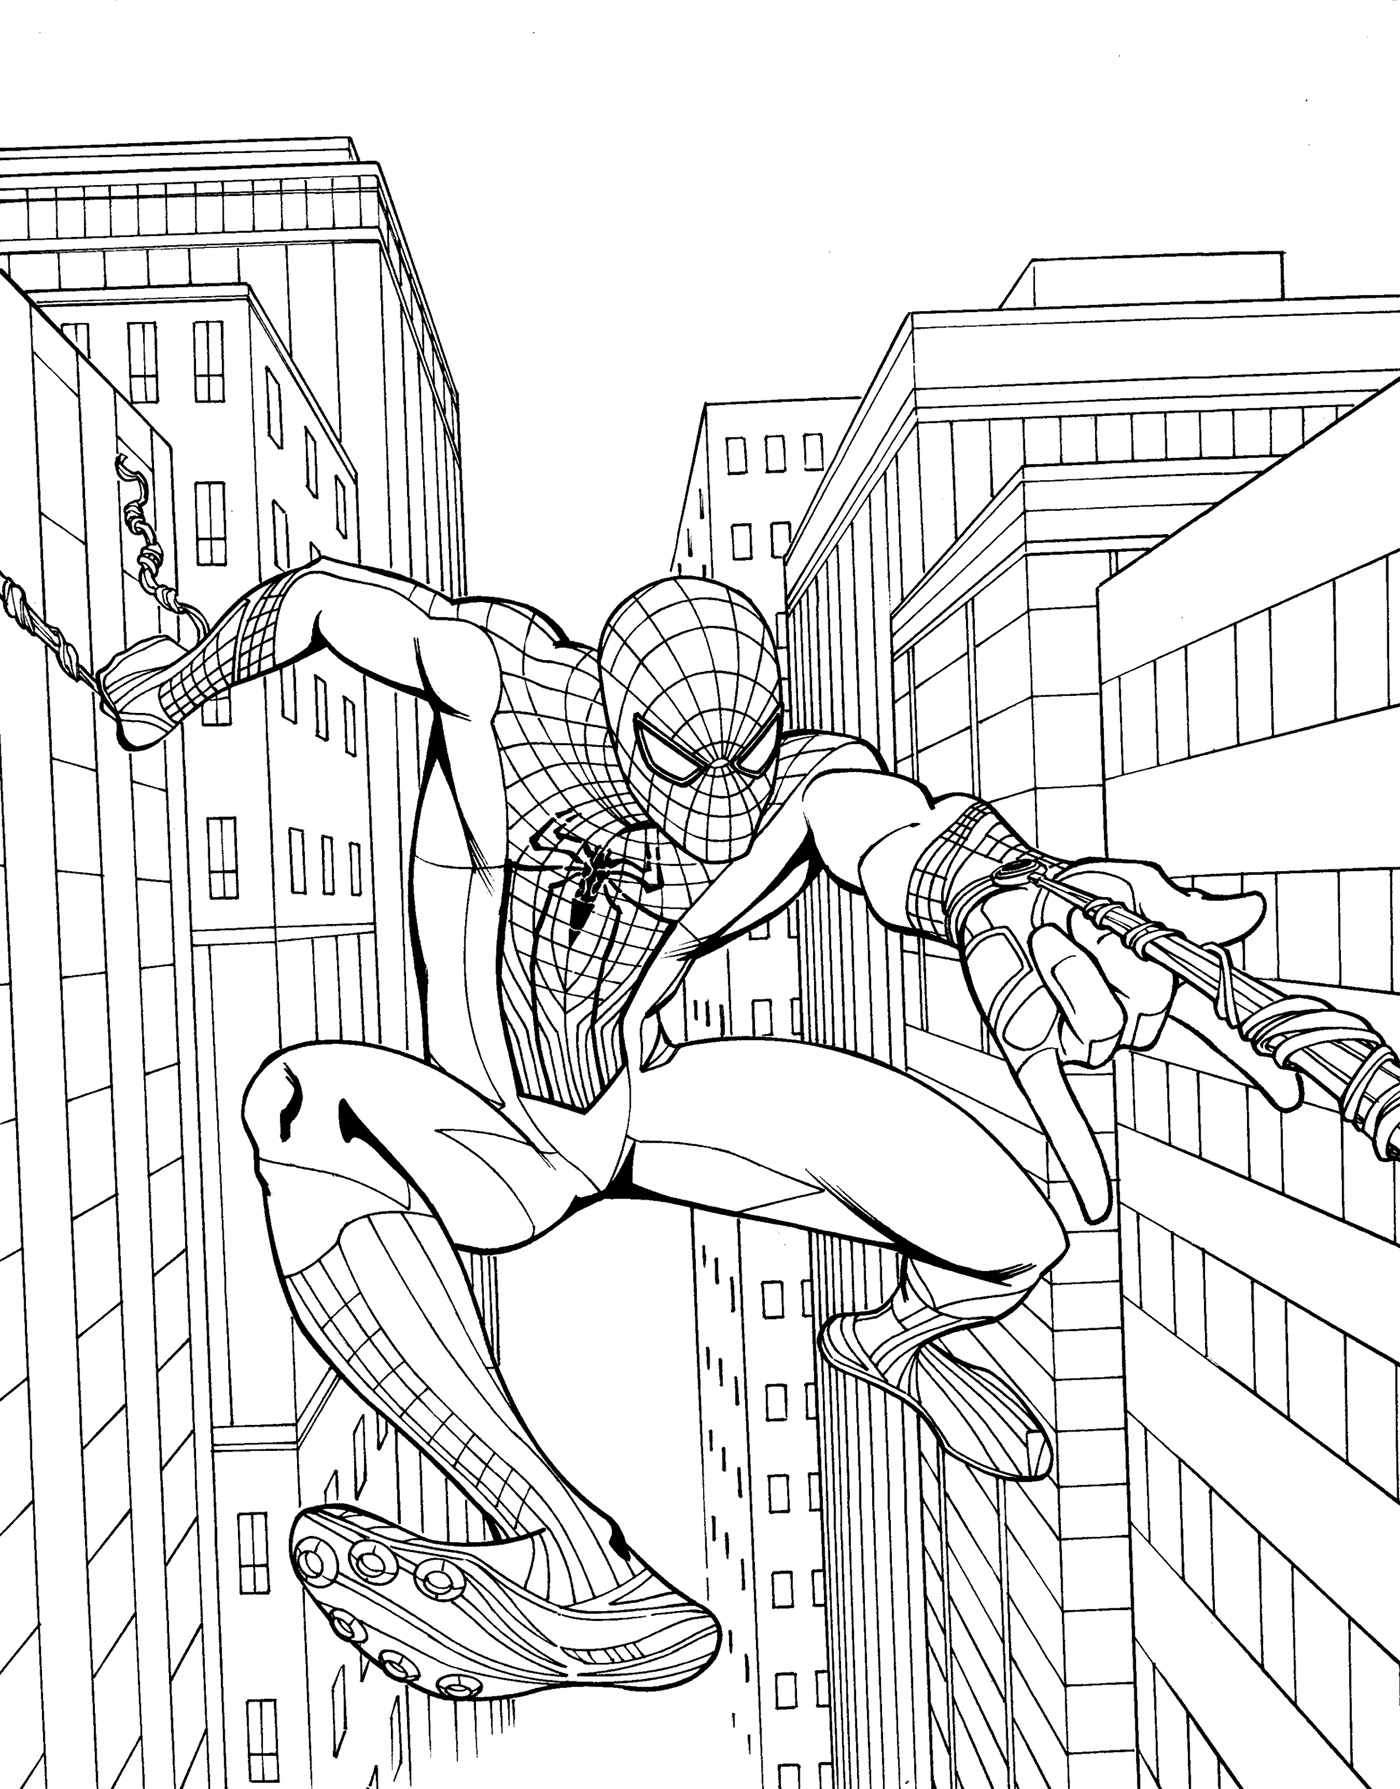 Spider-man 1 coloring book art on Behance